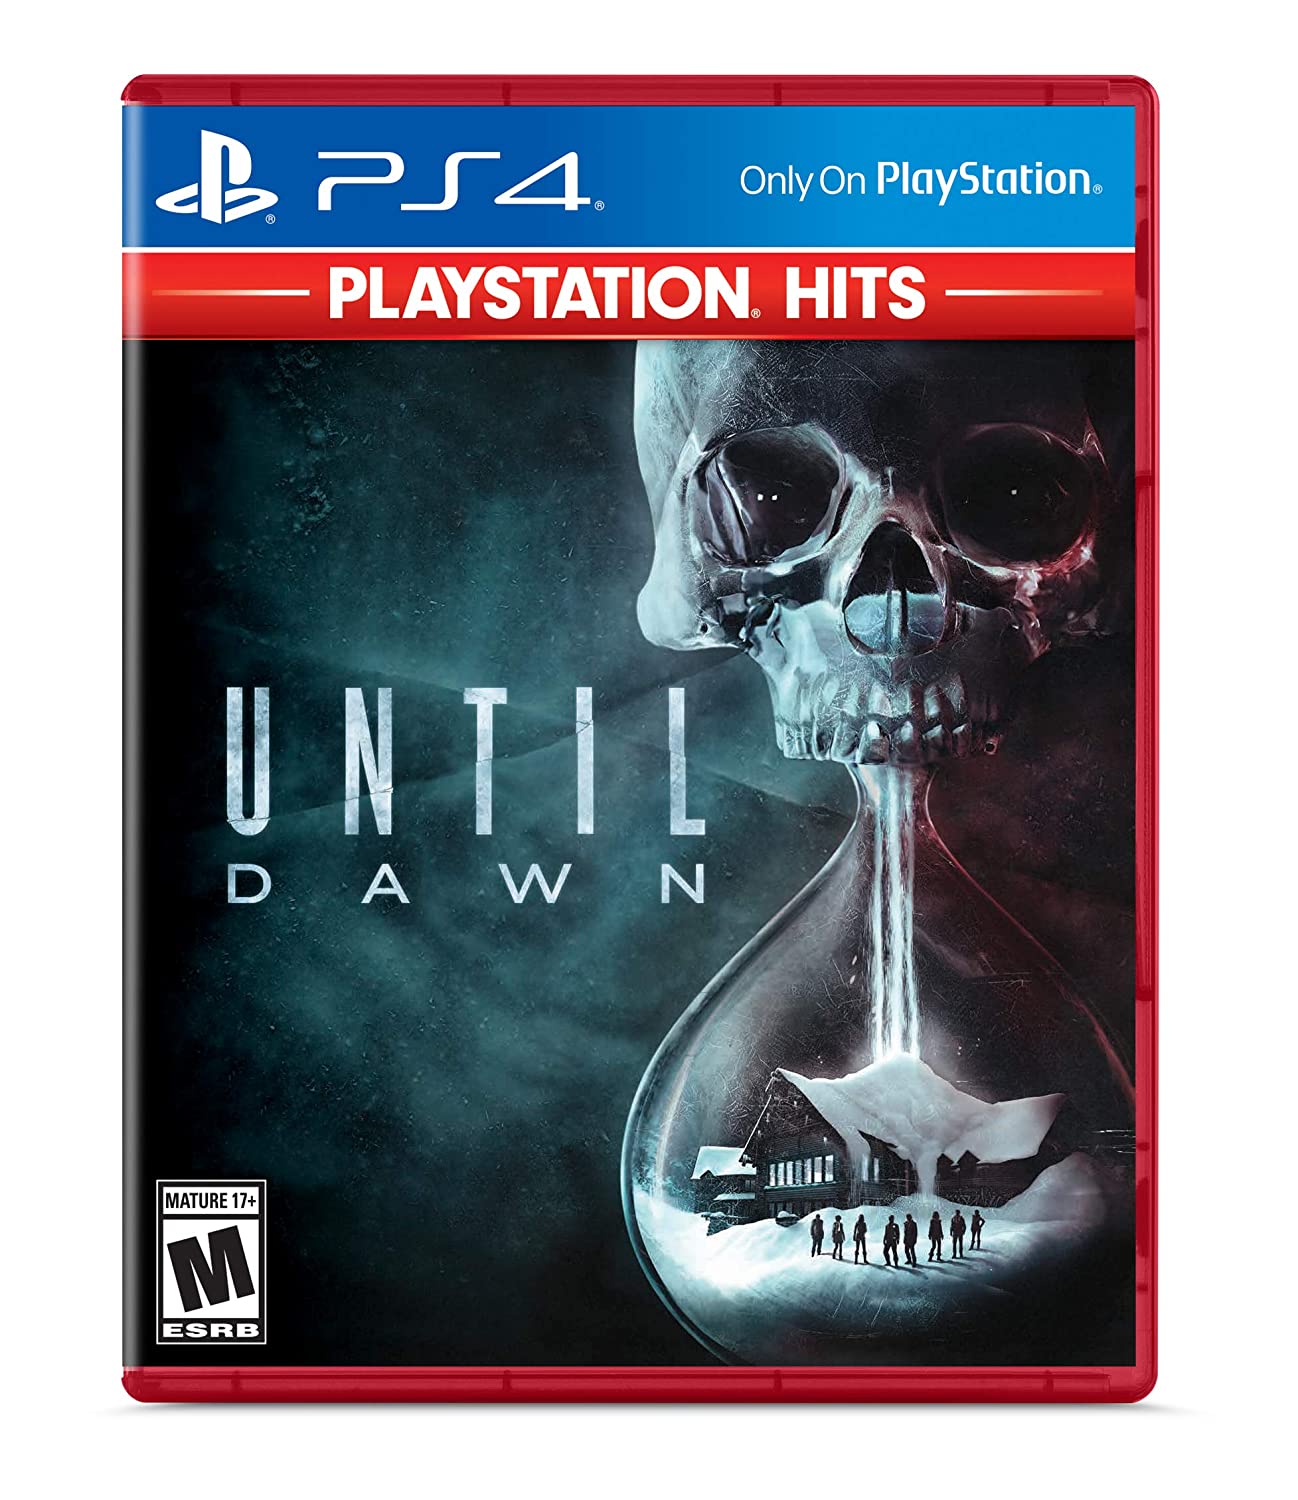 Until Dawn + The Last of Us Remastered (PS4) $18.76 or Until Dawn (PS4) $8.88 via Amazon